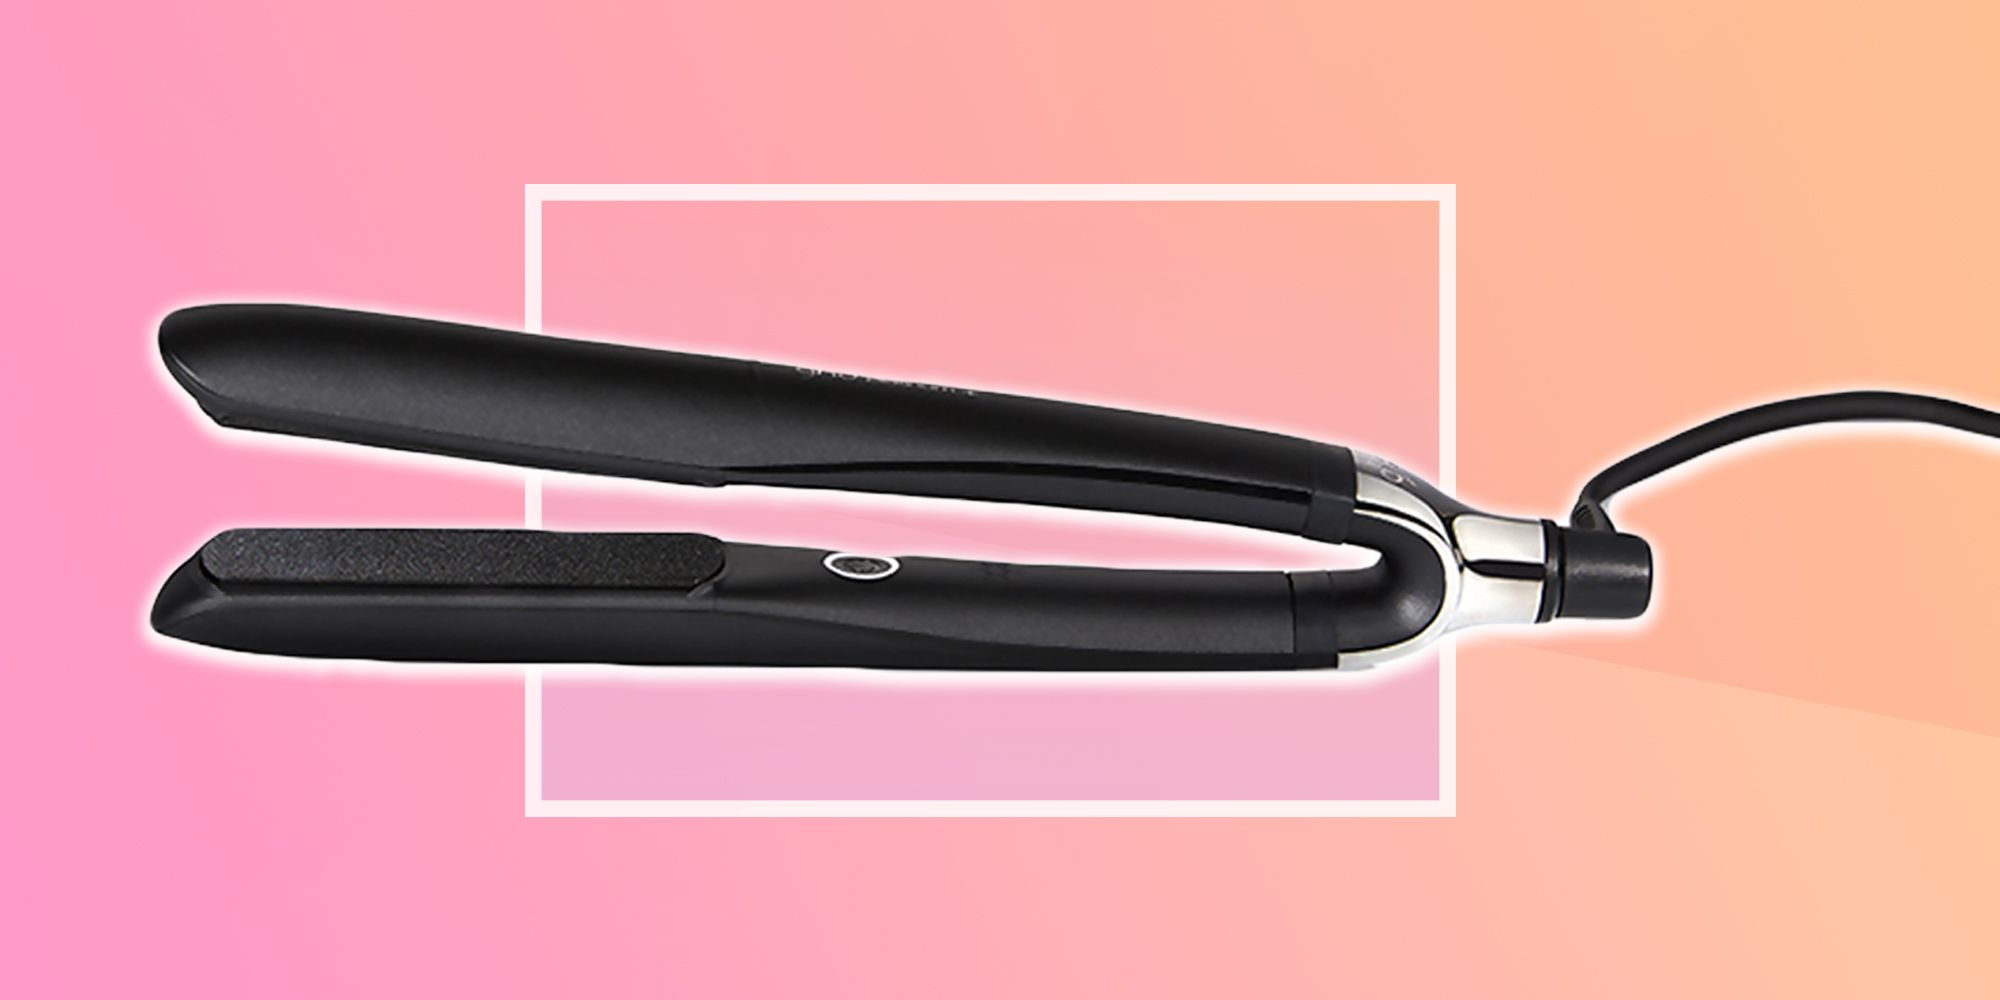 GHD Platinum Plus - GHD Has Launched the World's First Ever 'Smart